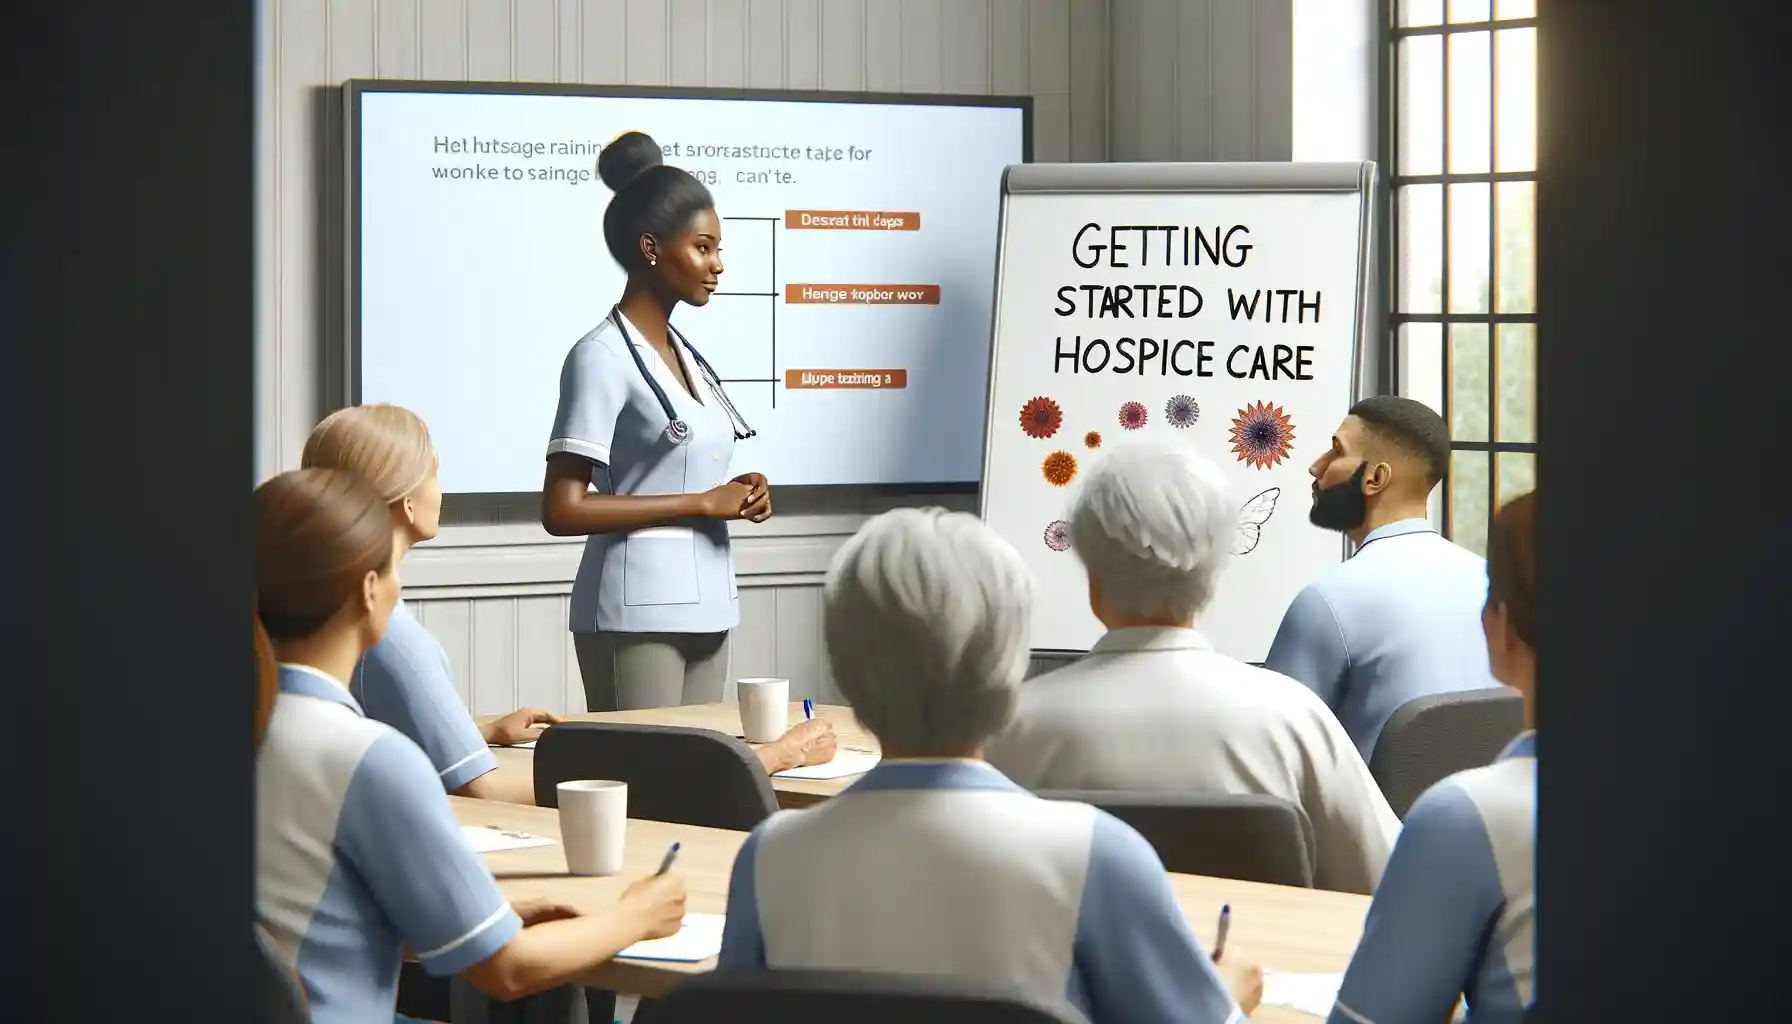 How to Get Started with Hospice in a Skilled Nursing Facility Training